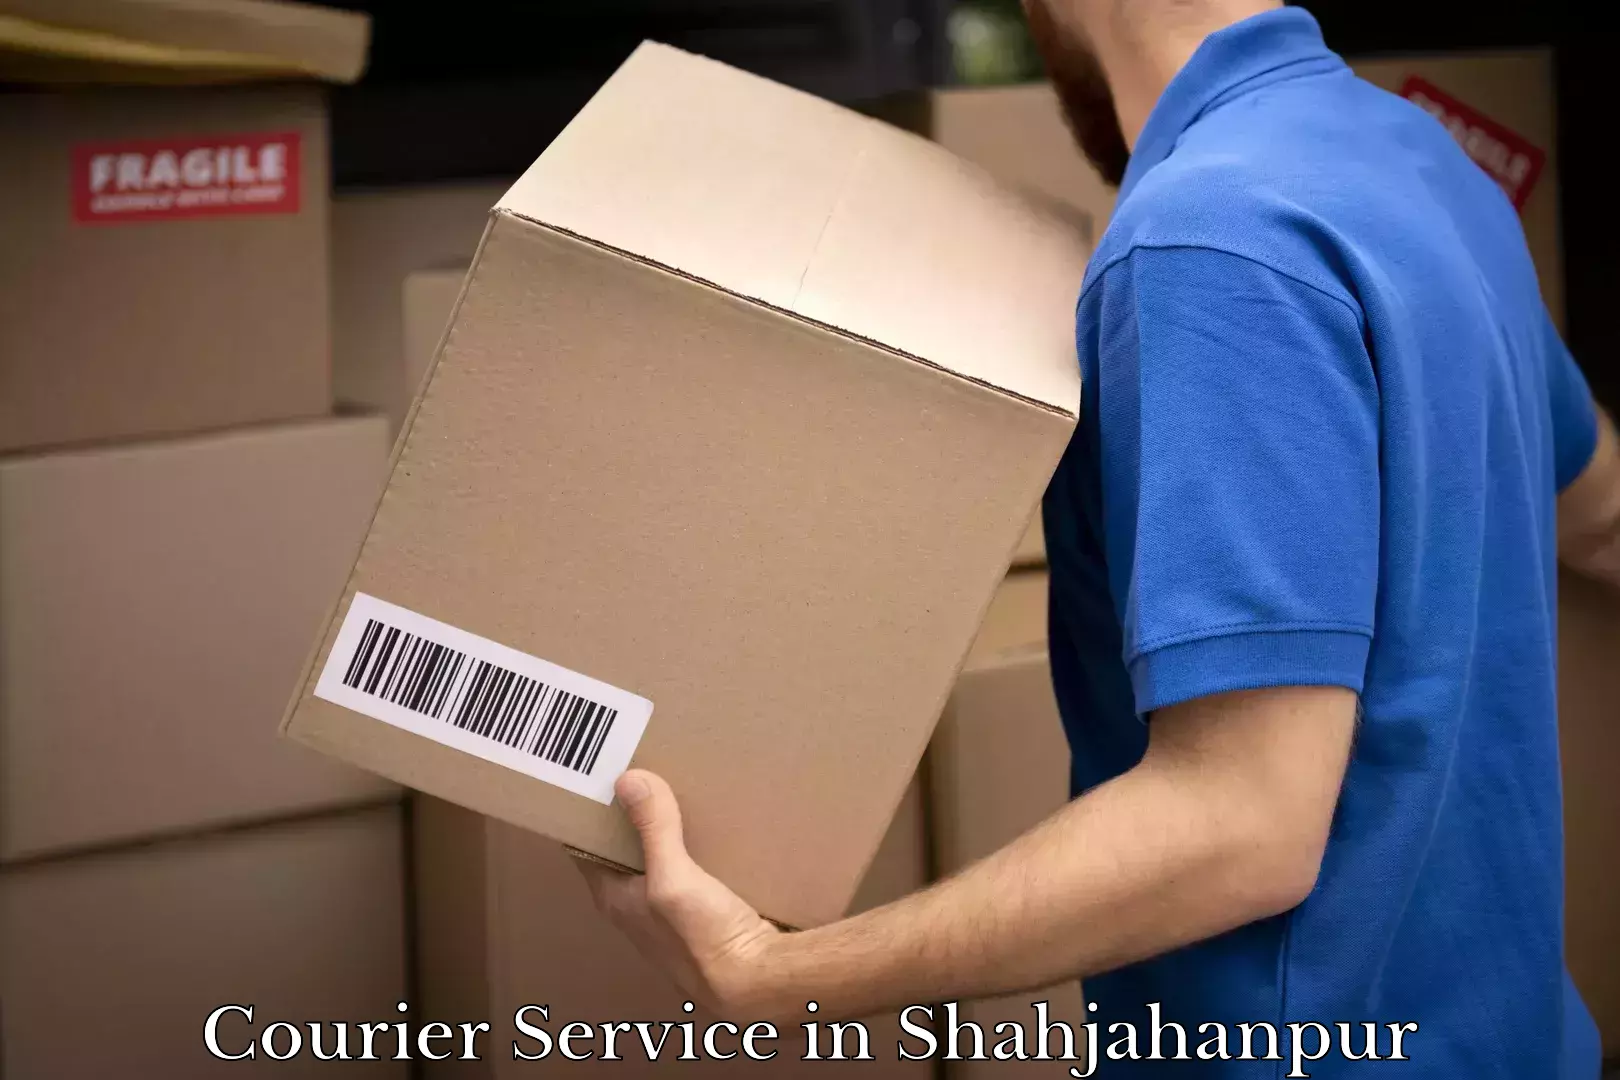 Modern delivery methods in Shahjahanpur